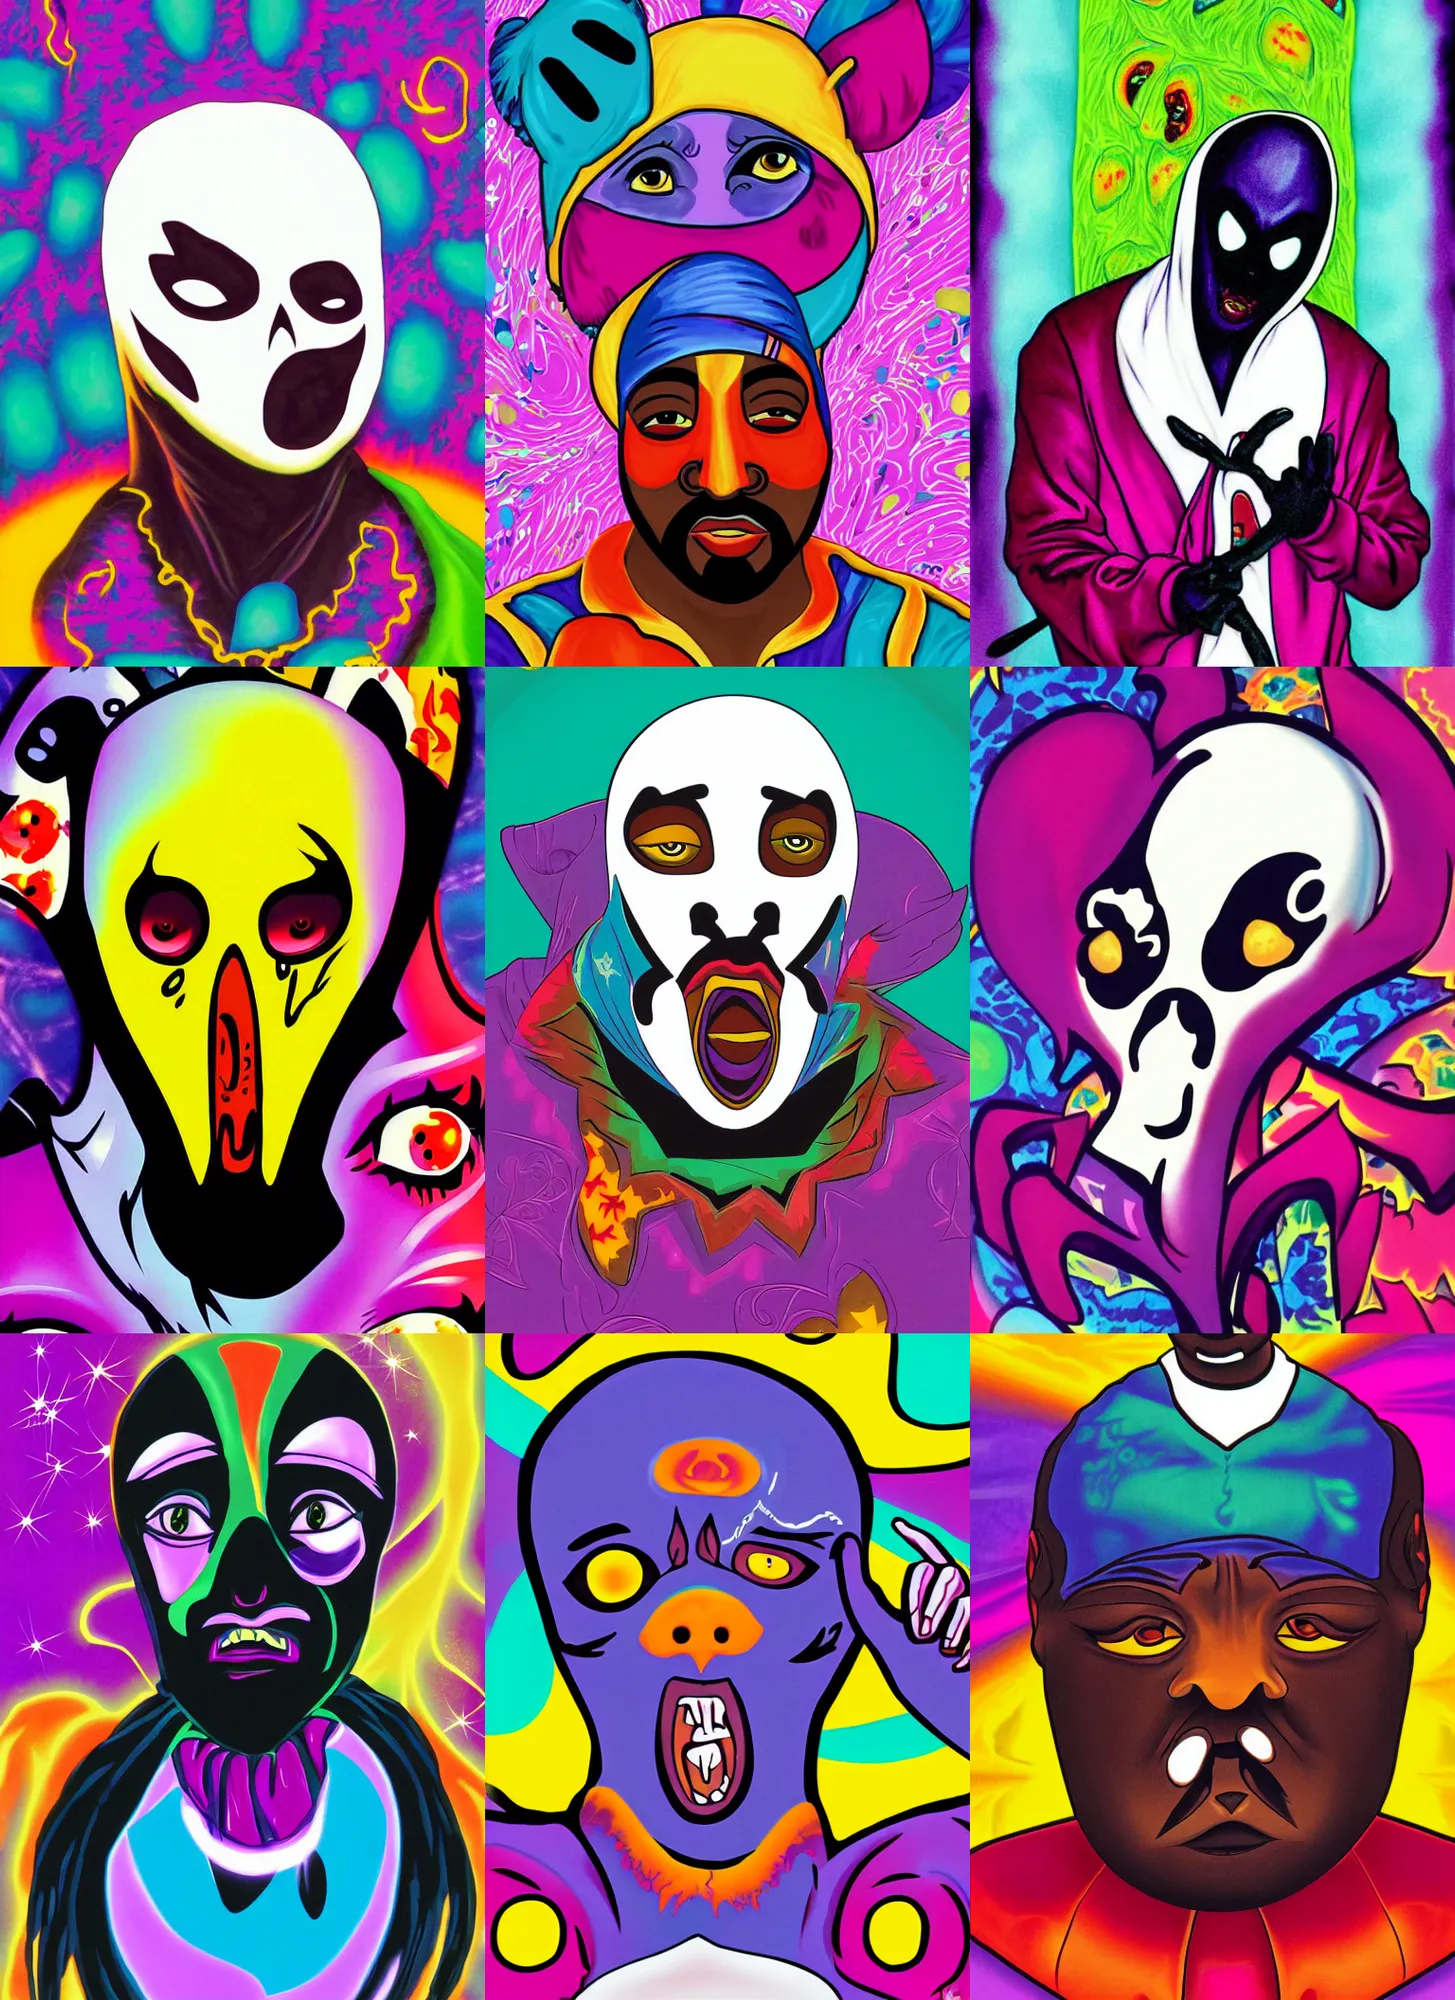 Prompt: character portrait of Ghostface from Scream artwork by Lisa Frank